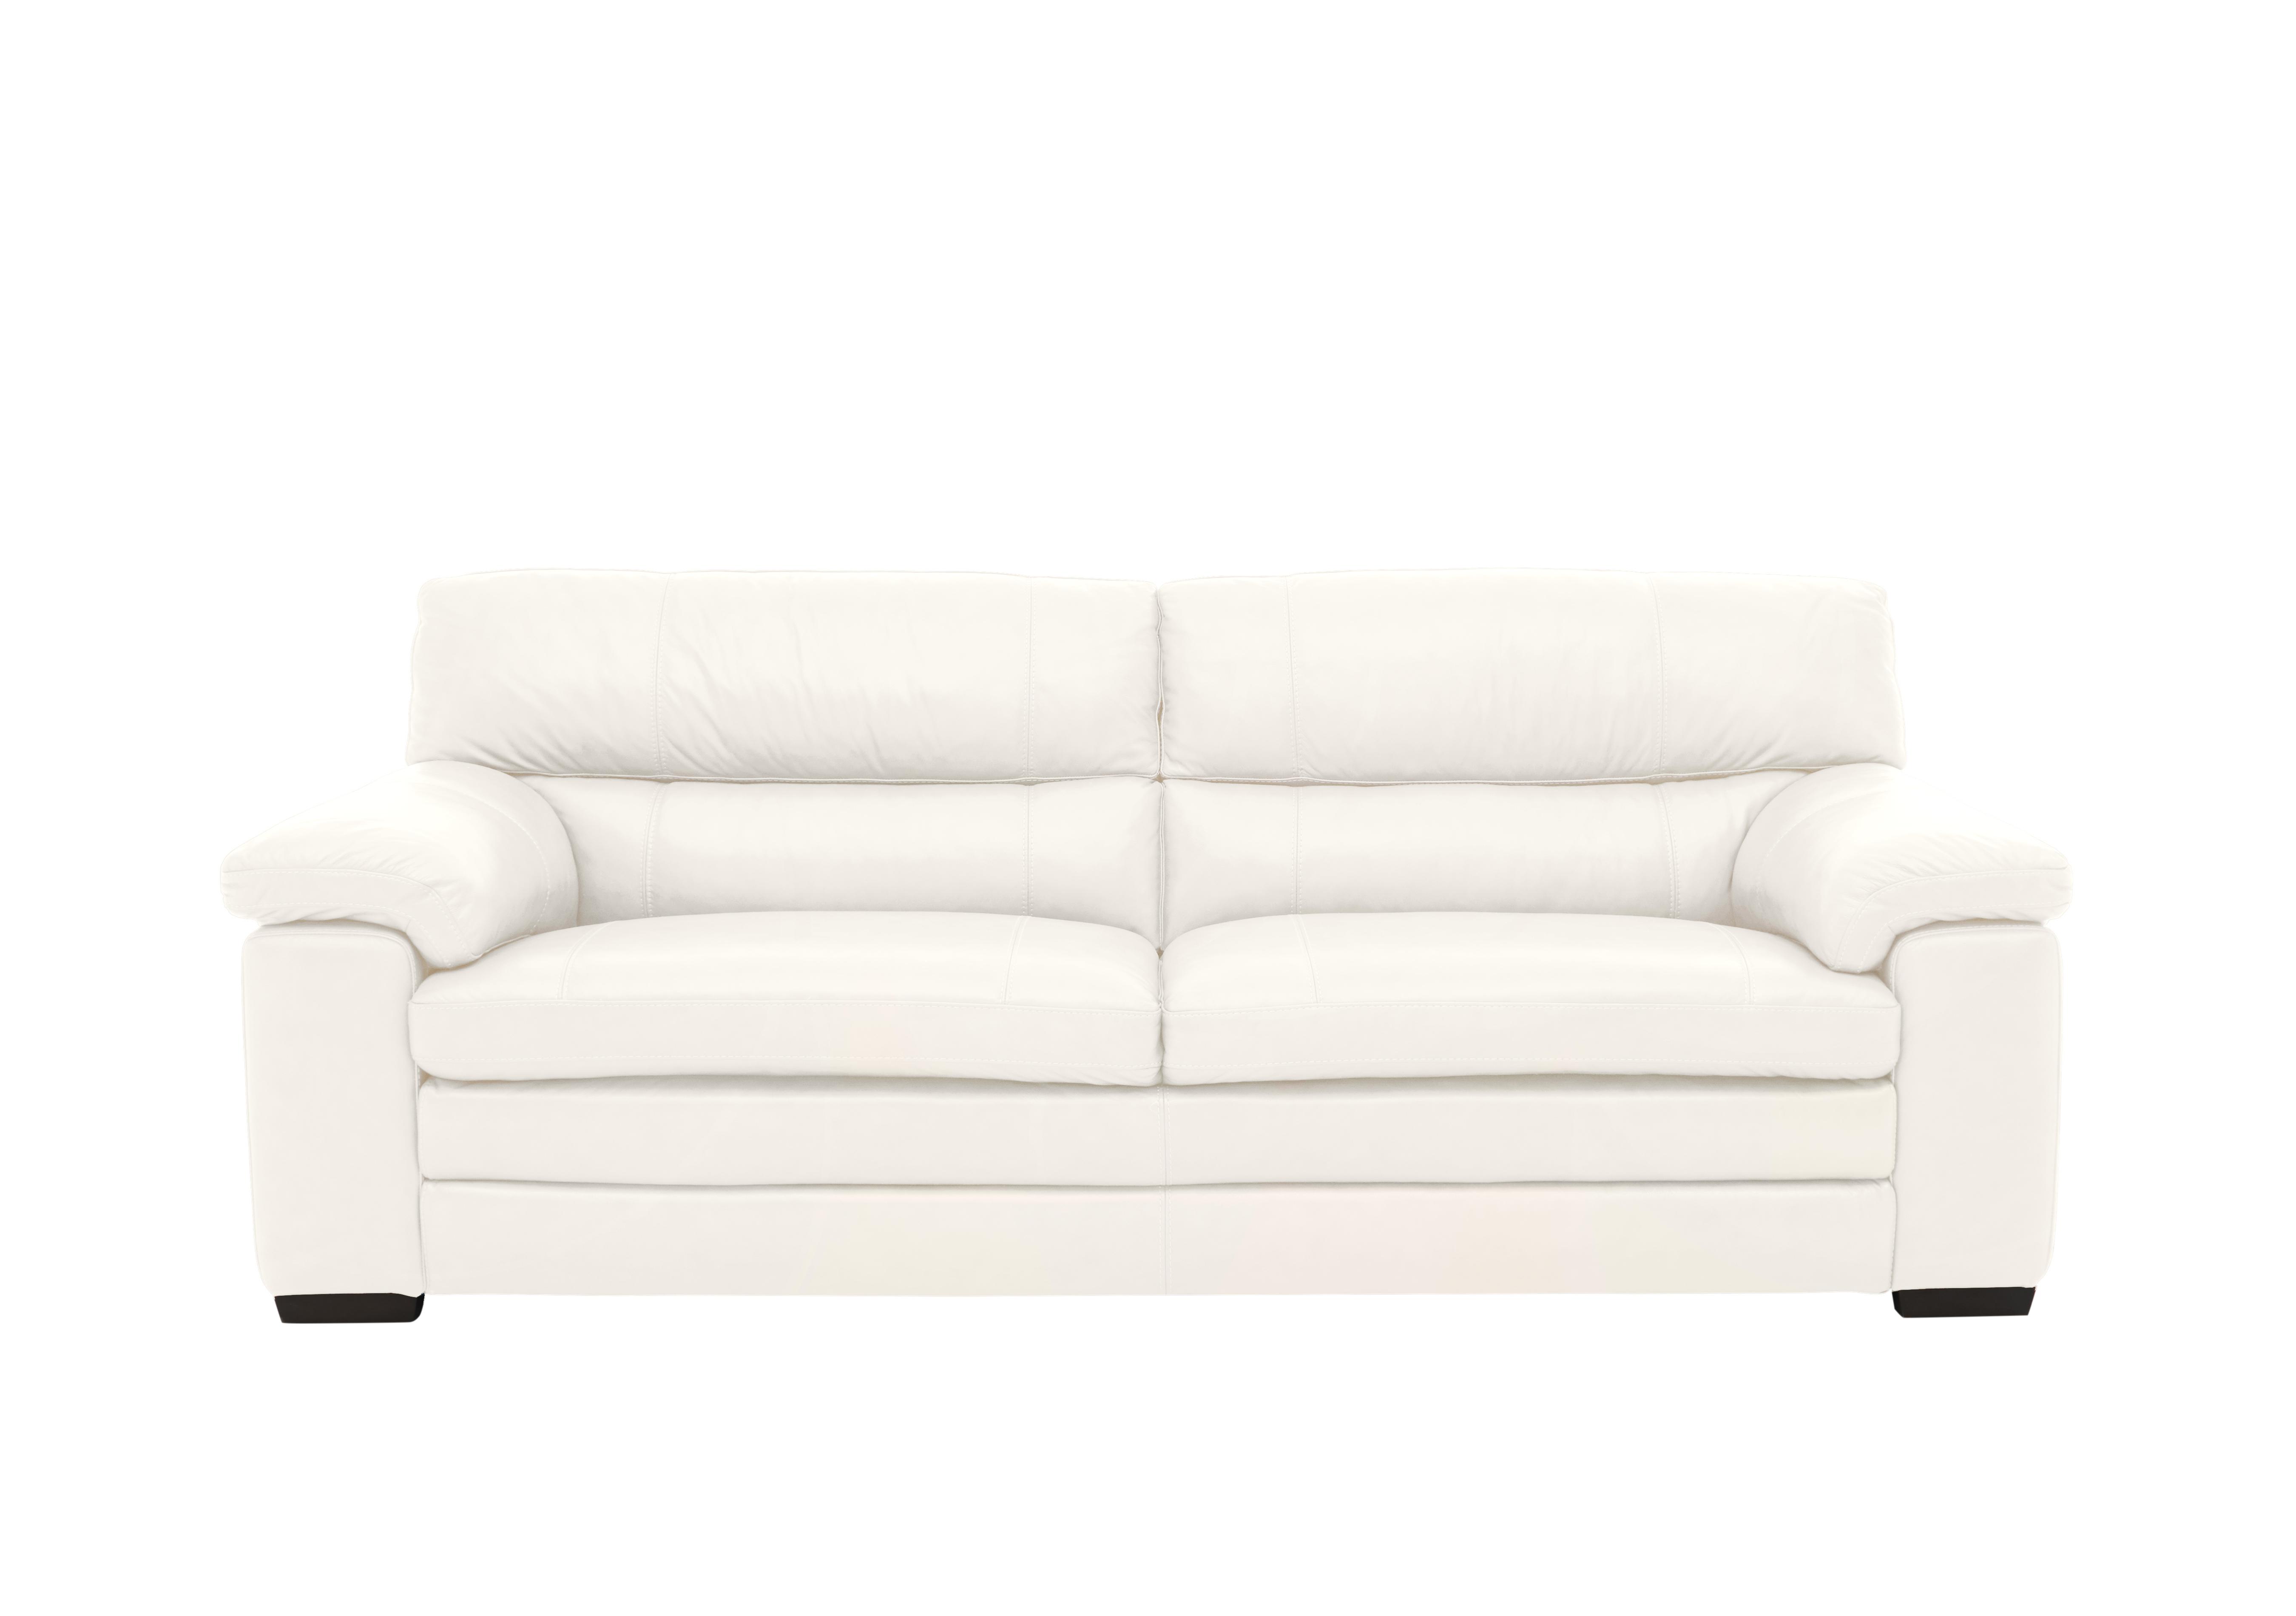 Cozee 3 Seater Pure Premium Leather Sofa in Bv-744d Star White on Furniture Village